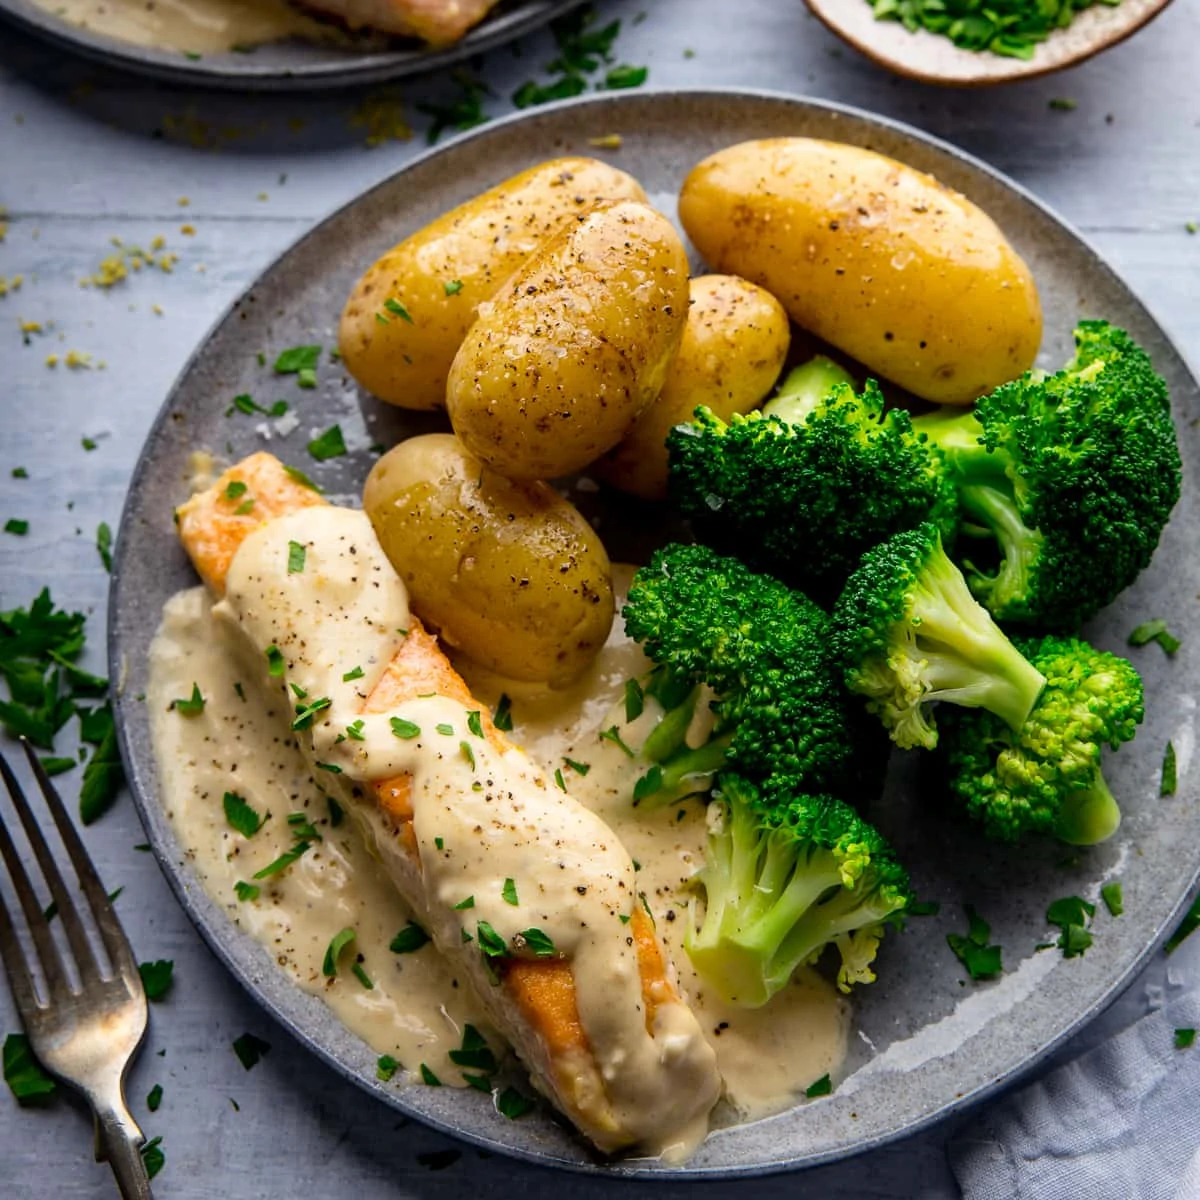 Salmon on a grey plate with creamy white wine sauce, broccoli and new potatoes